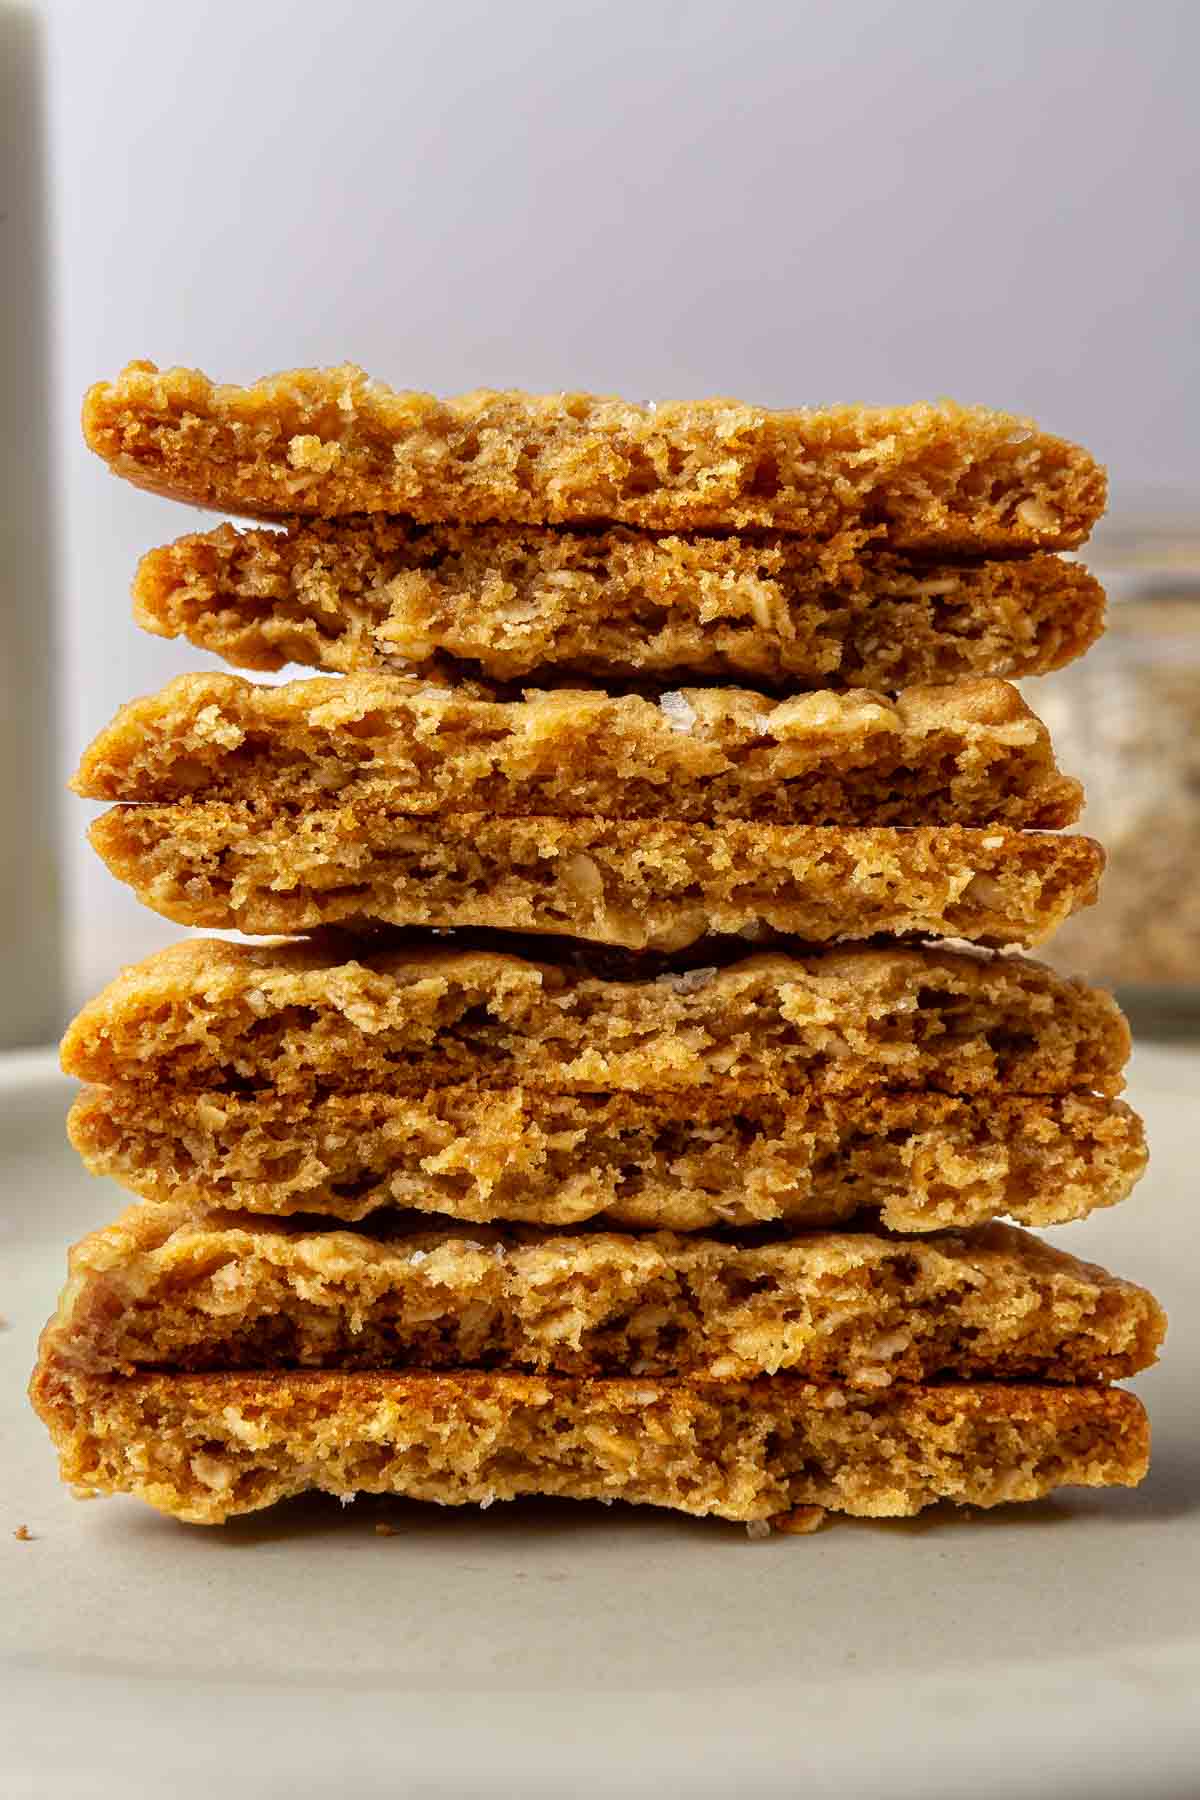 Peanut butter cookies that are cut in half and stacked.